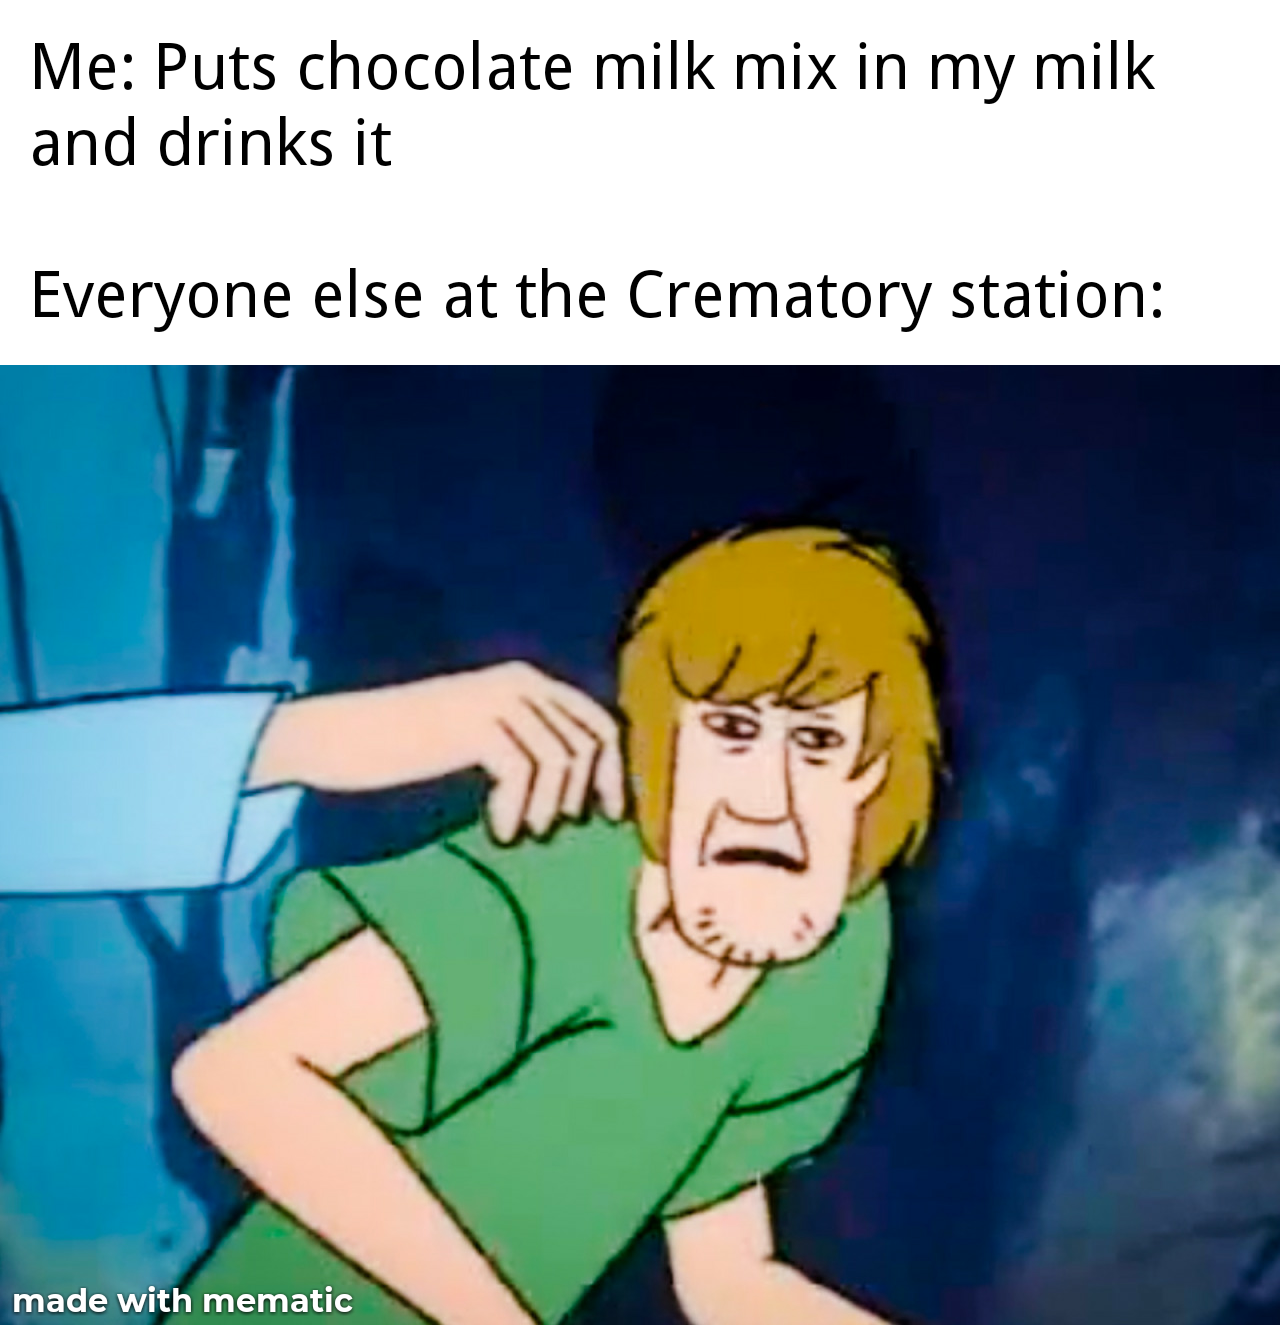 shaggy meme - Me Puts chocolate milk mix in my milk and drinks it Everyone else at the Crematory station made with mematic